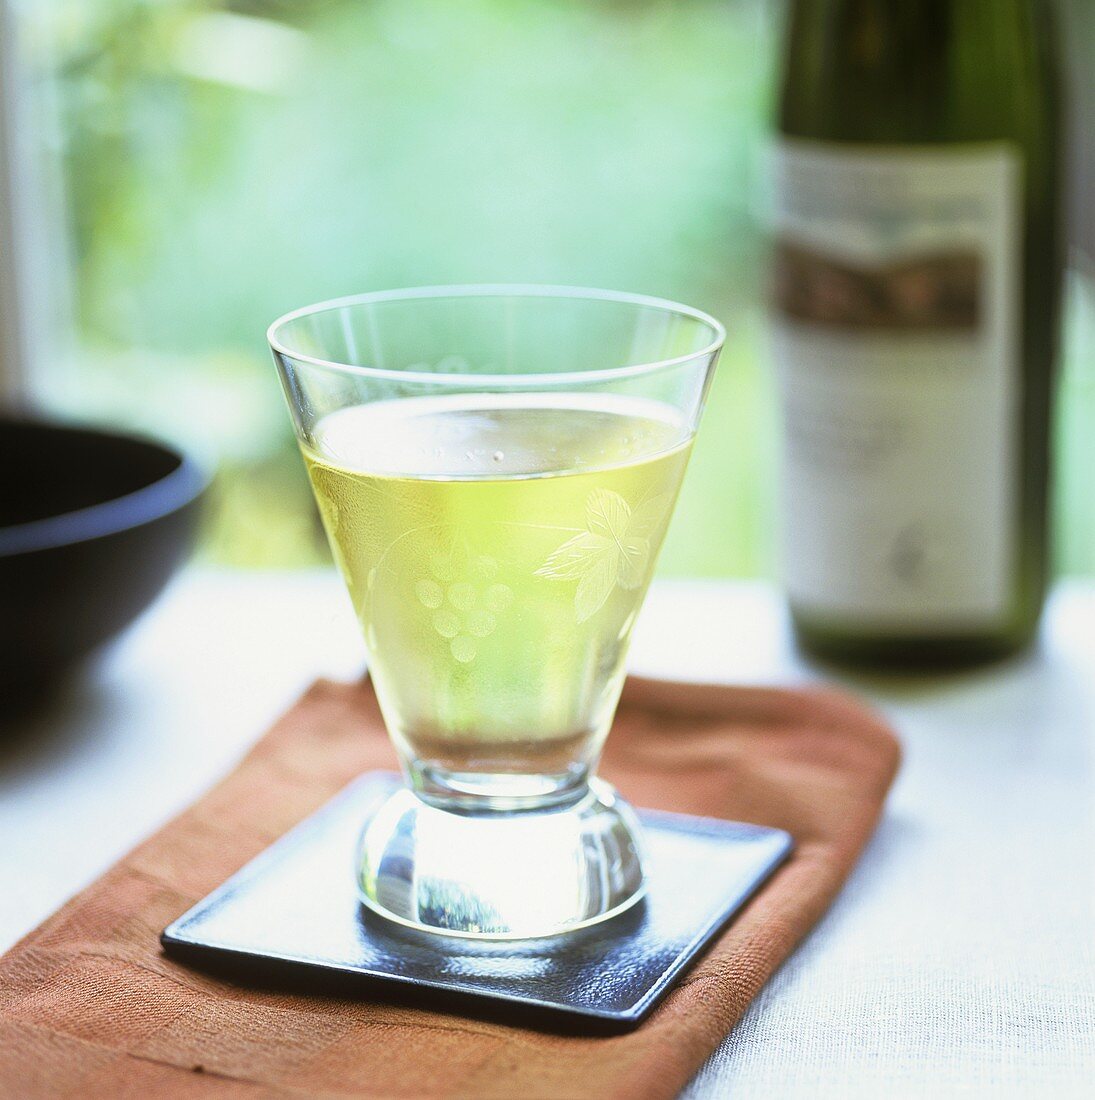 Glass of white wine on small tray in front of wine bottle